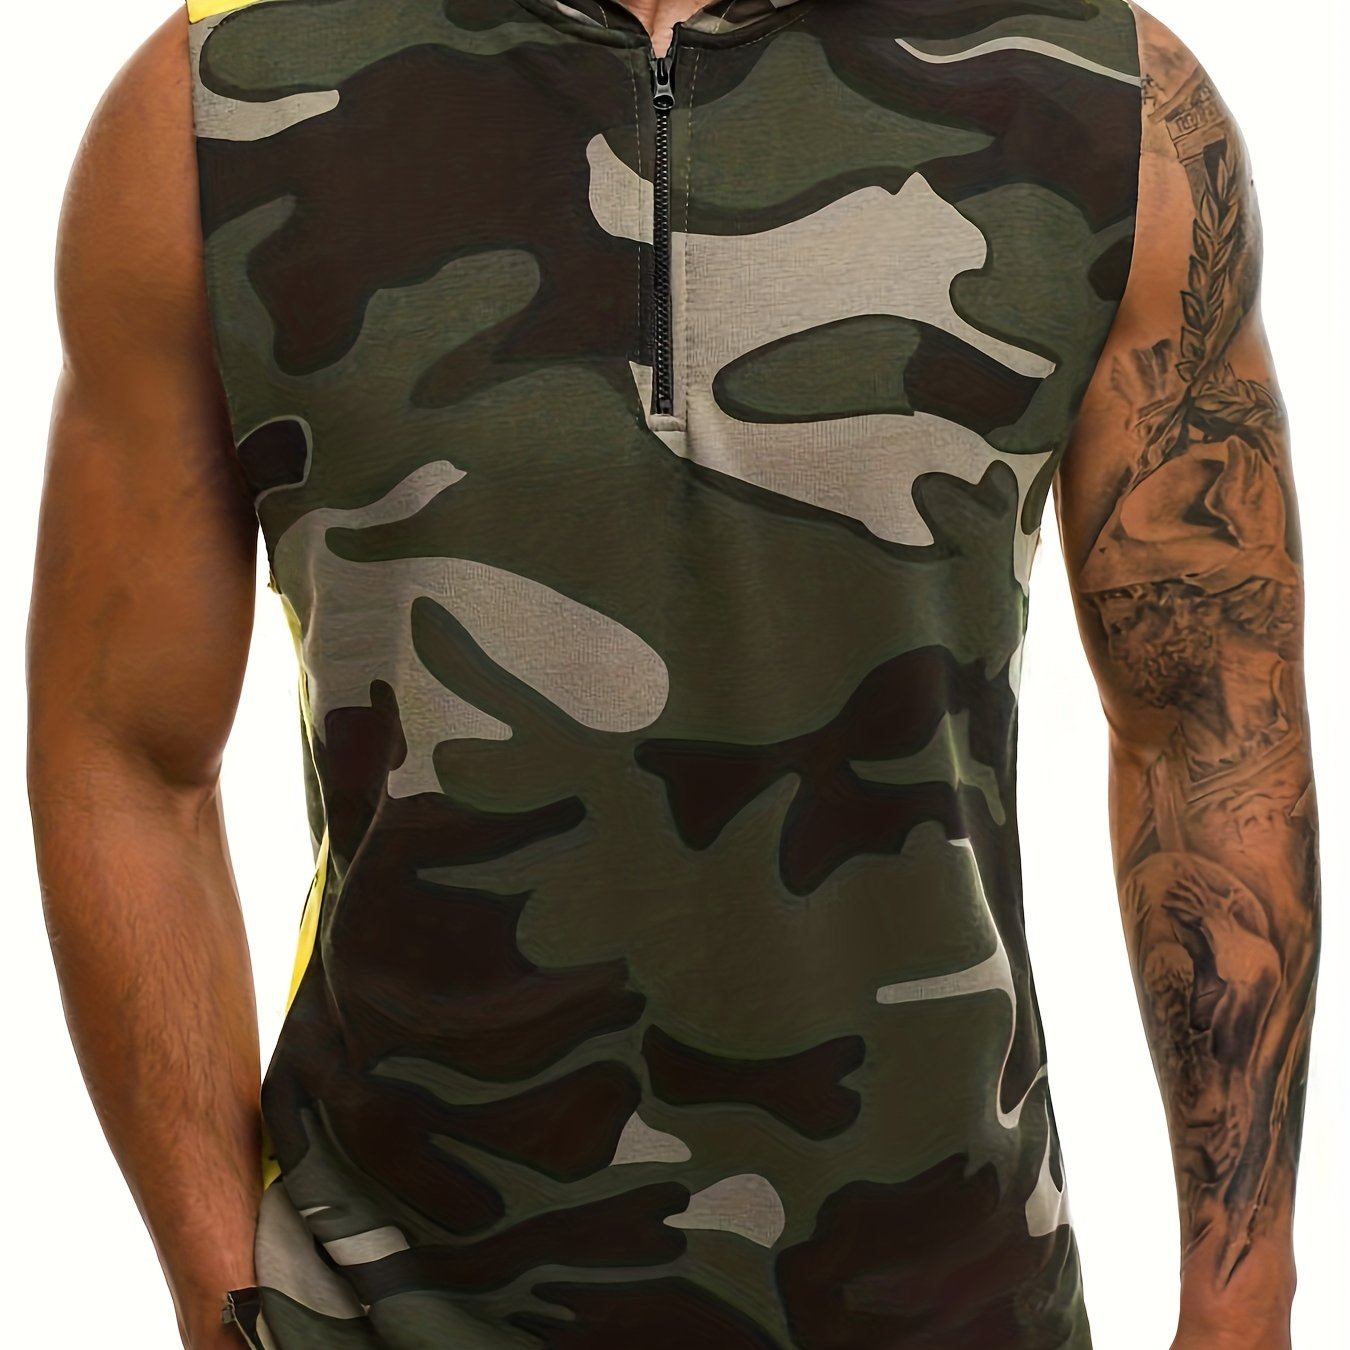 Plus Size Men's Camouflage Hooded Tank Top With Zipper For Summer, Street Style Sleeveless Hoodies For Males